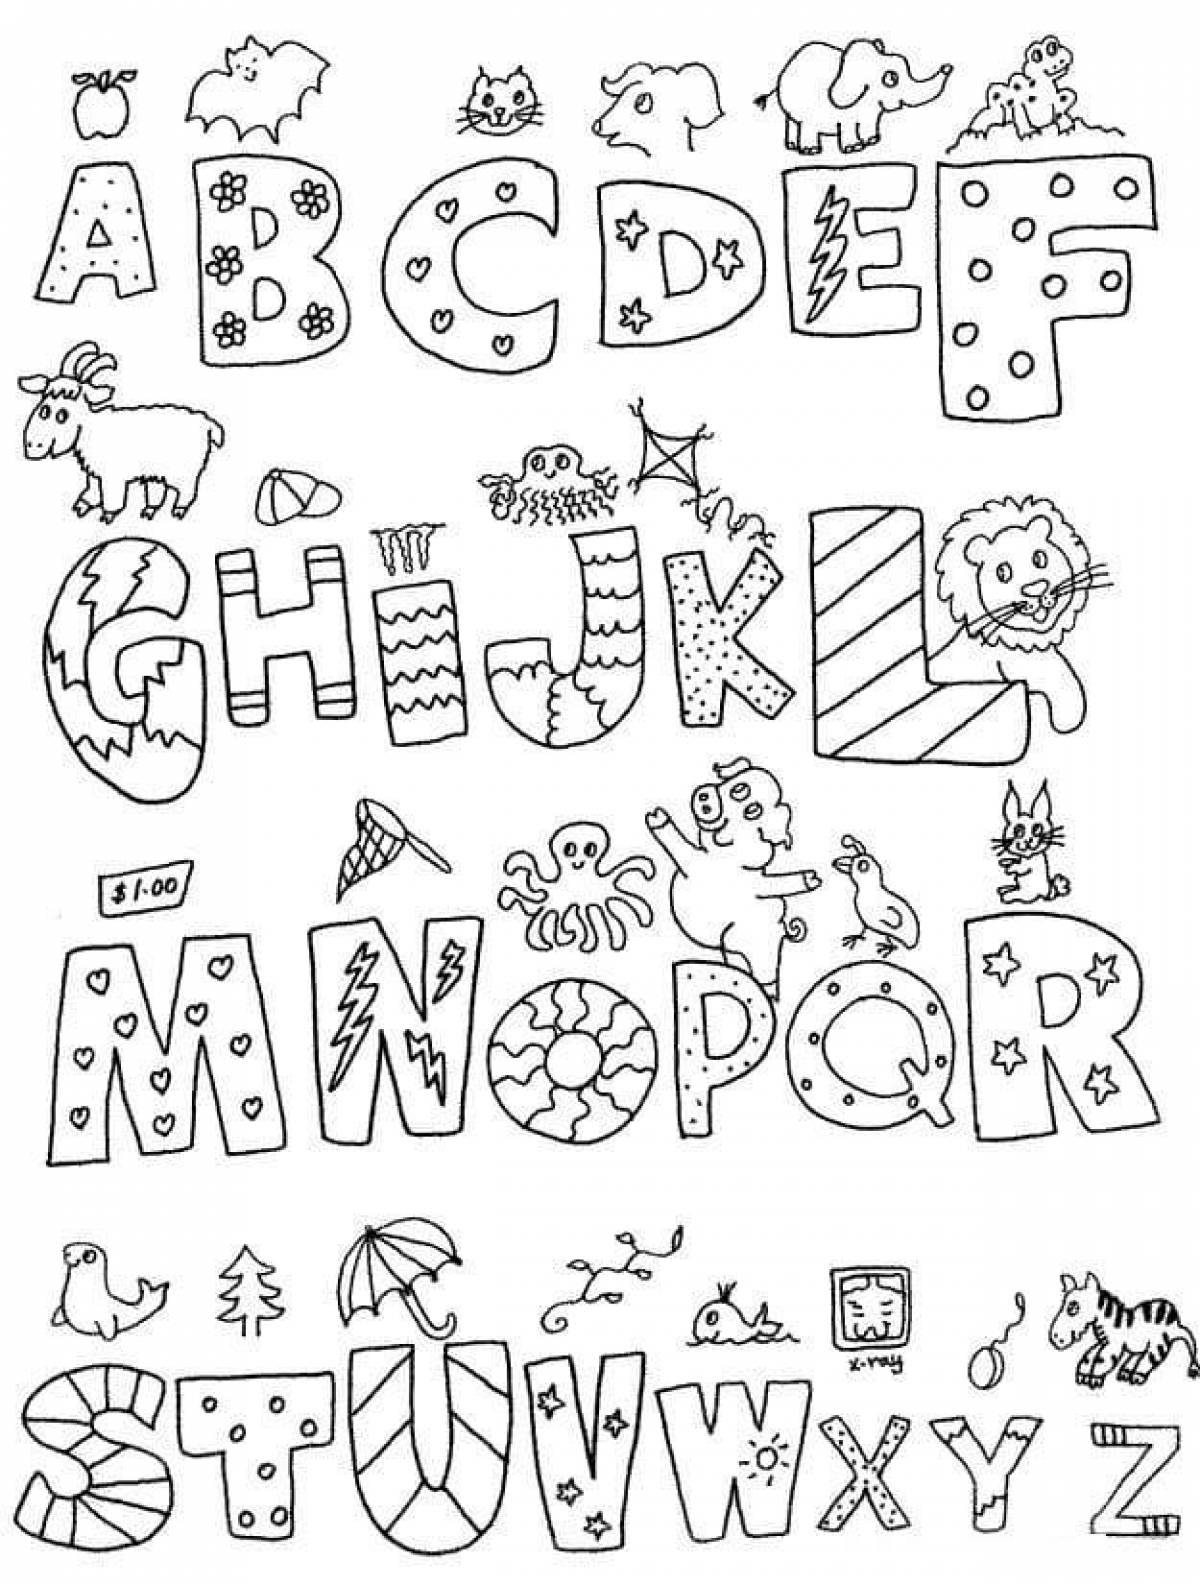 A funny coloring of the English alphabet